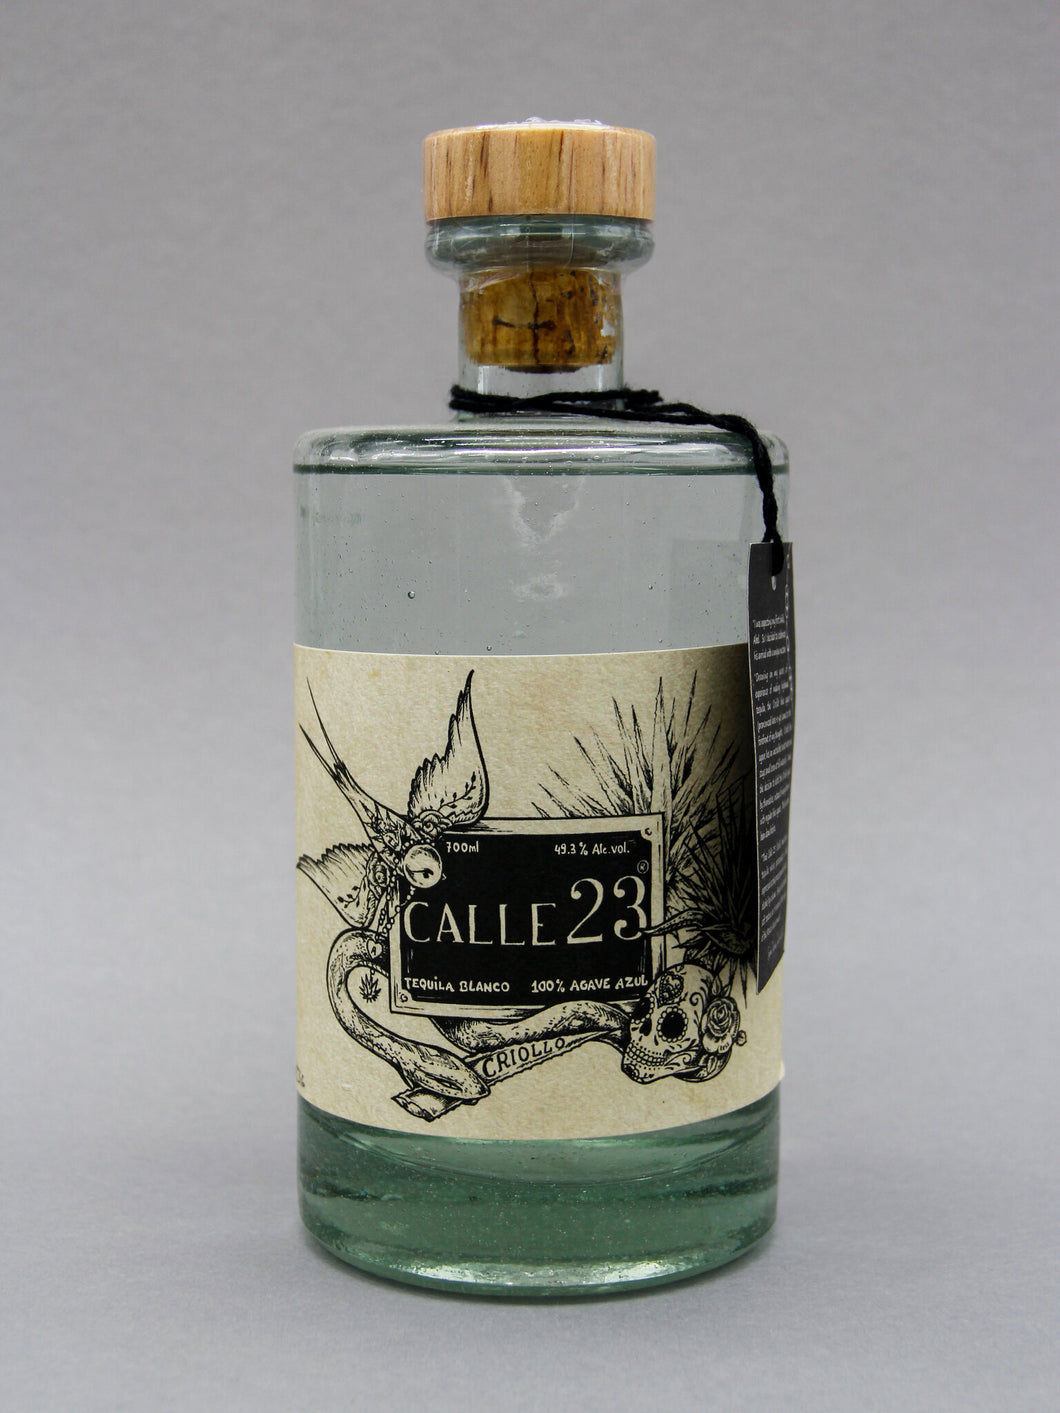 Calle 23 Criollo Tequila Blanco 100% Agave (49.3%, 70cl)